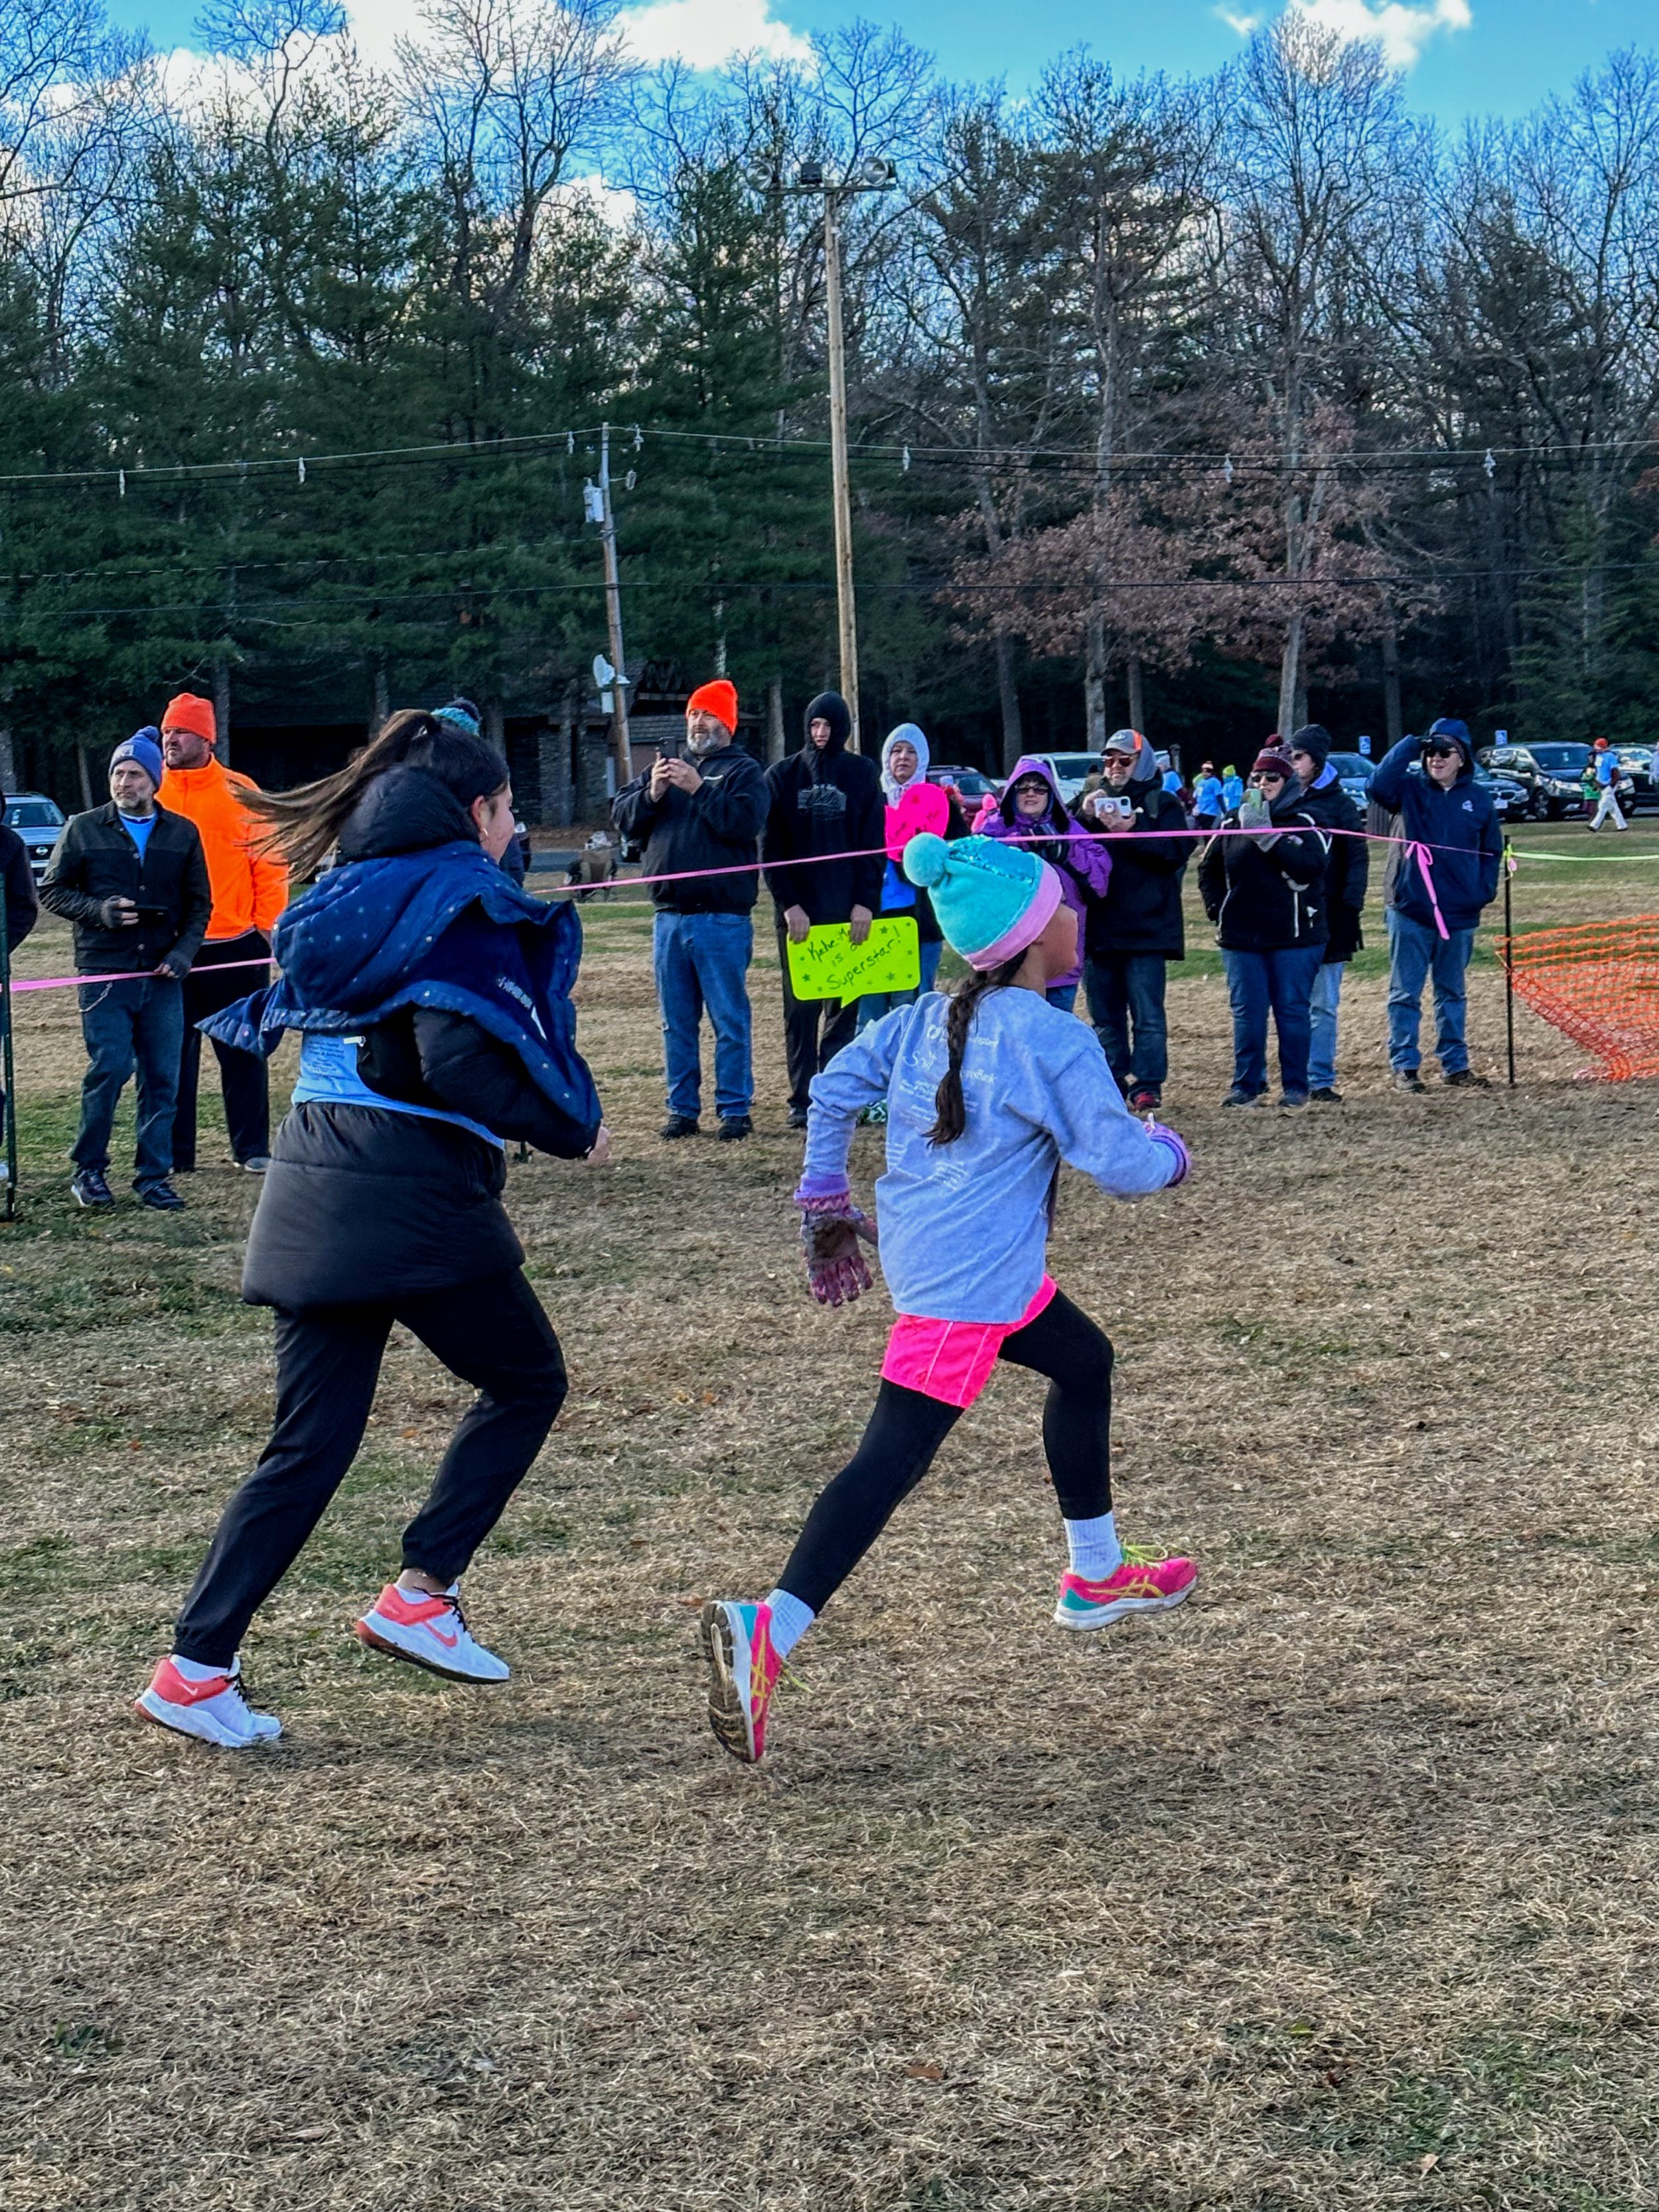   SPCS students joined local GOTR groups and finished off the season with an organization-wide 5K! Staff volunteers ran alongside students in support.   